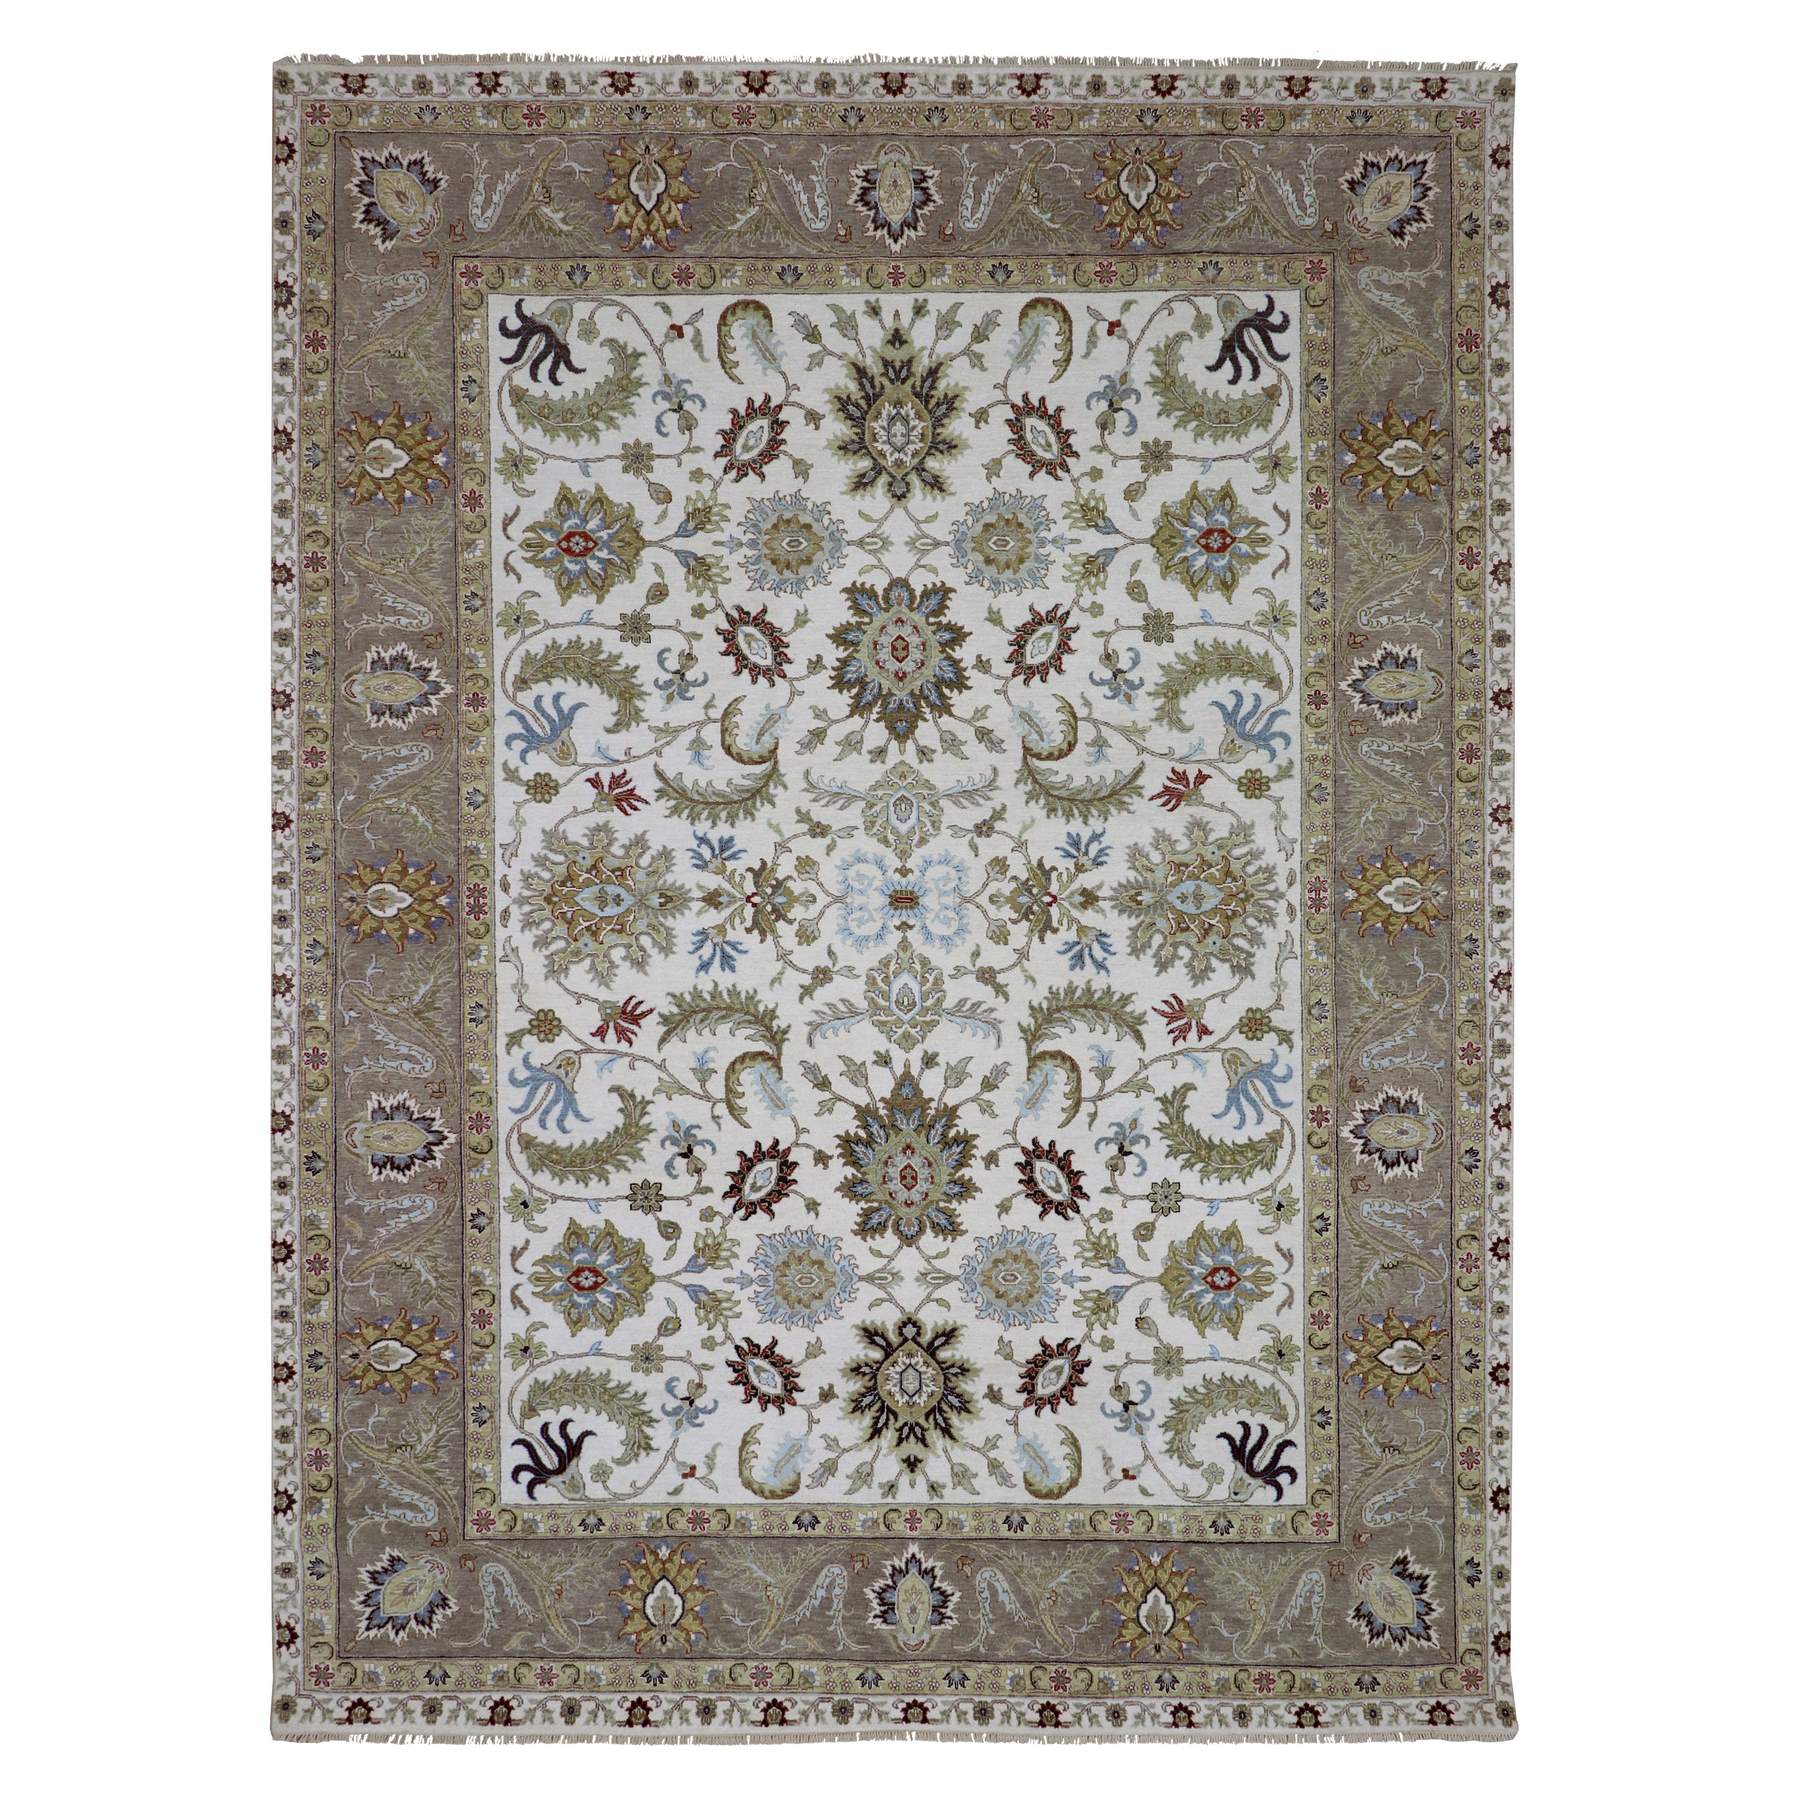 Super White With Elephant Brown, Pure Velvety Wool, Natural Dyes, Agra Hand Knotted With Scroll and Large Leaf Design, Oriental Rug